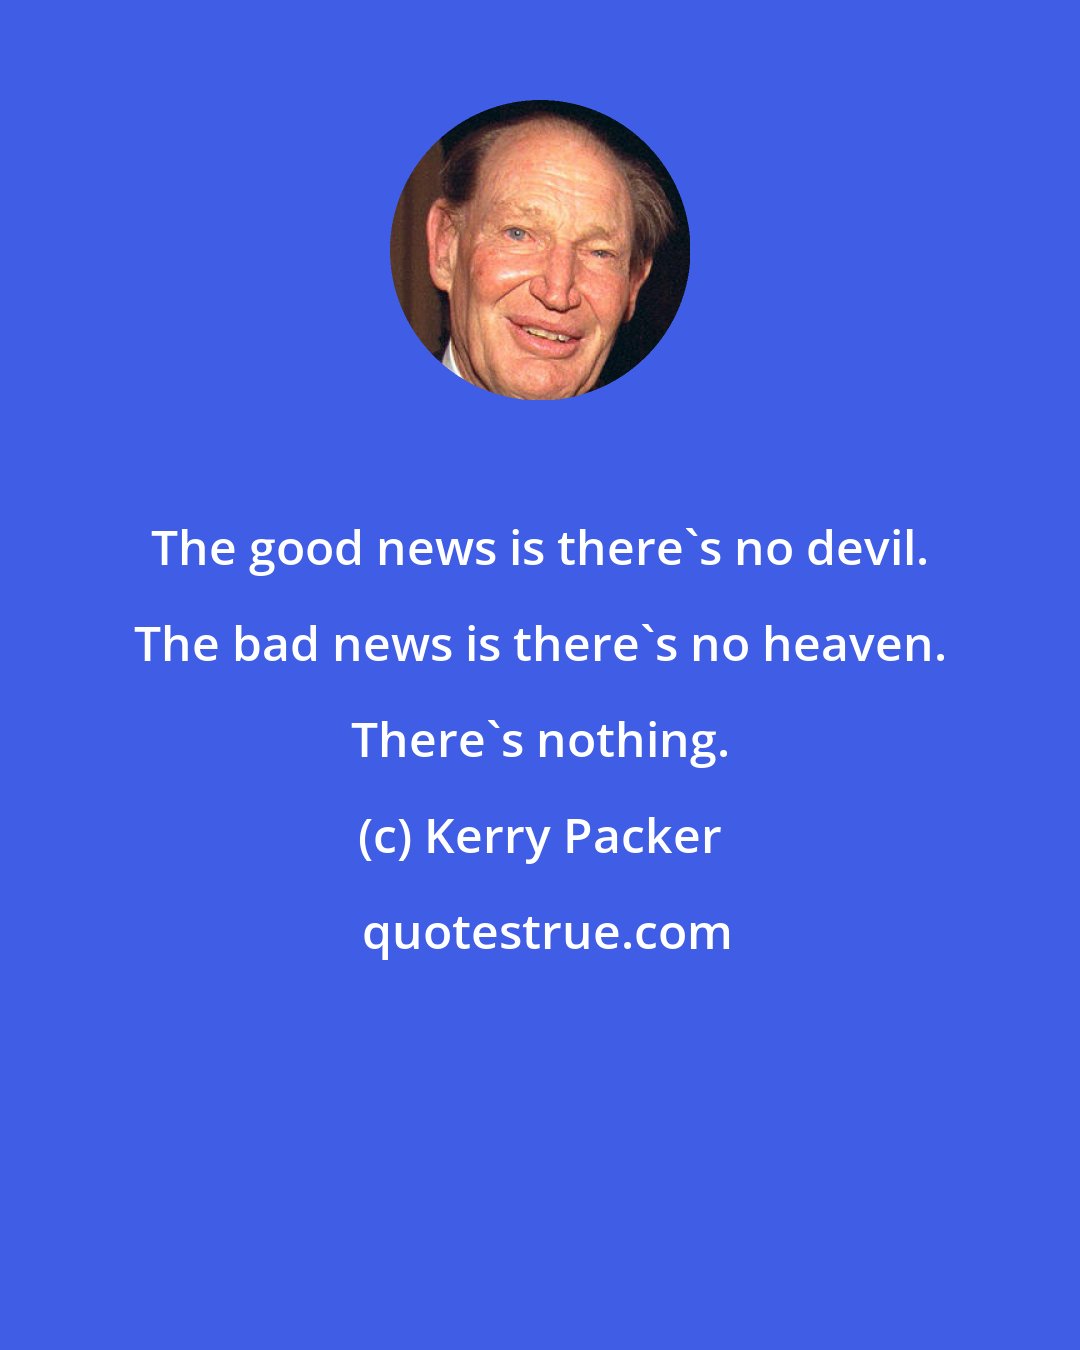 Kerry Packer: The good news is there's no devil. The bad news is there's no heaven. There's nothing.